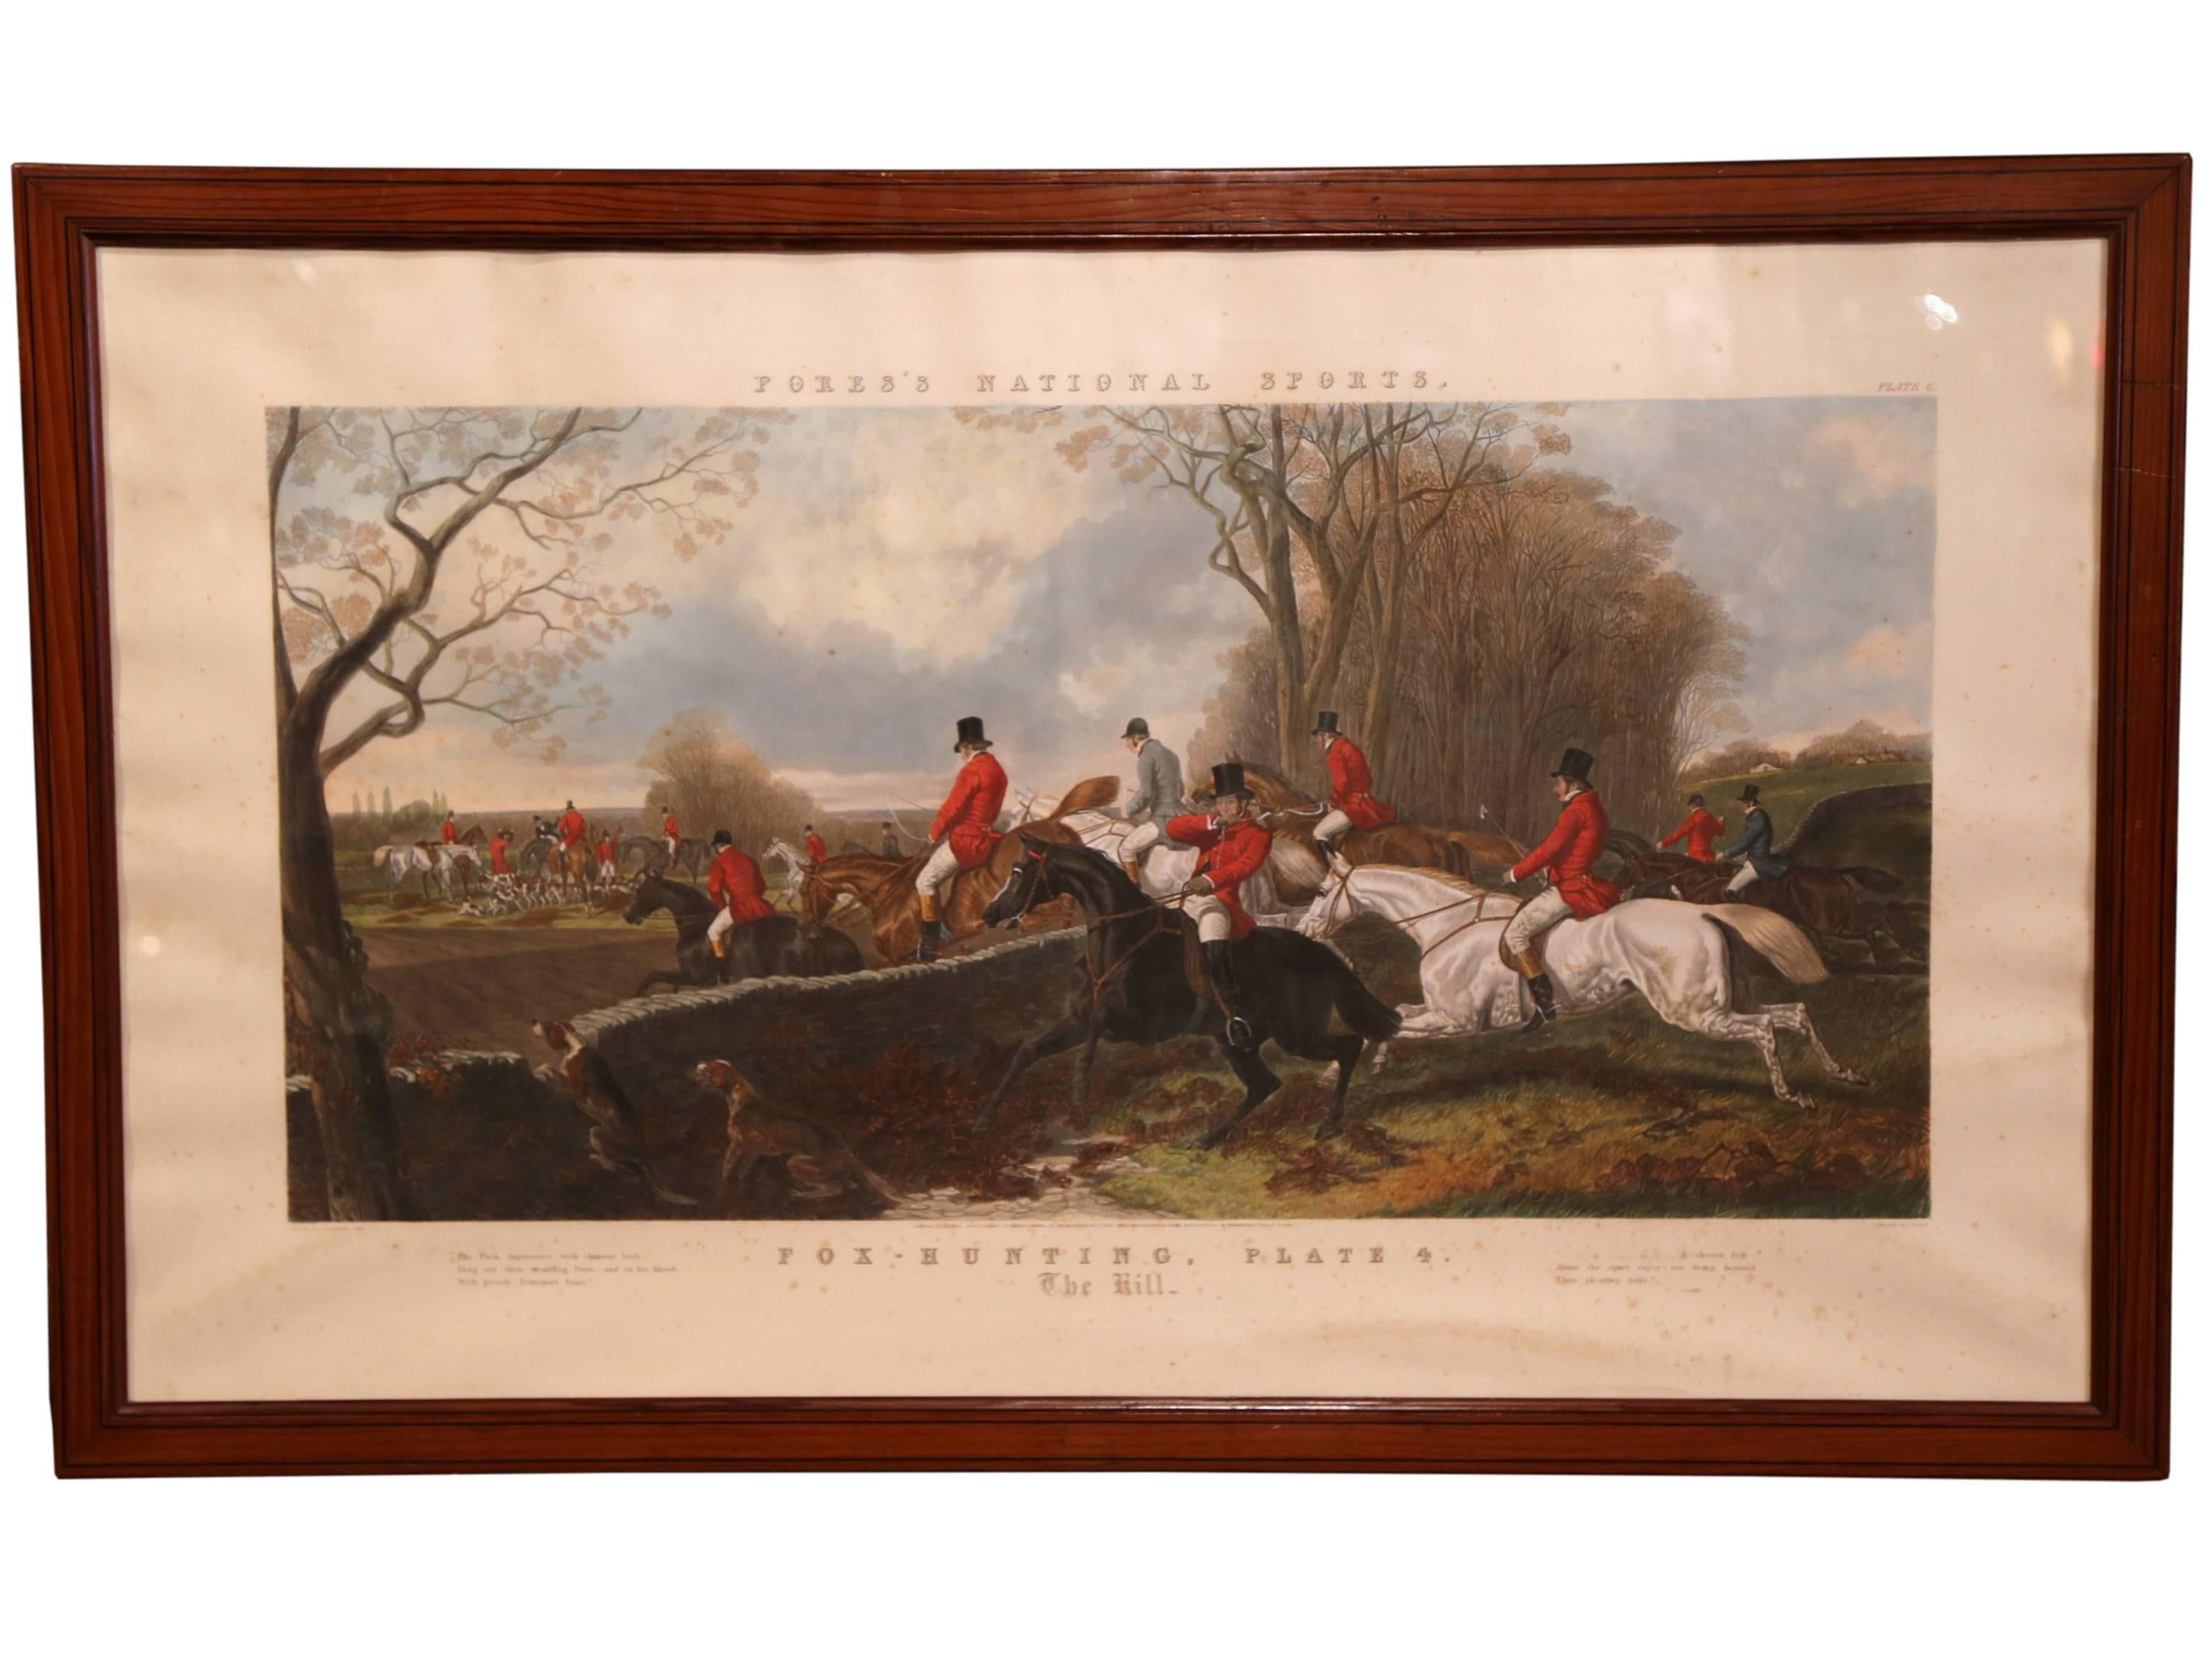 Unknown Animal Art - Large 19th Century English Framed Watercolor Fox Hunt Scene "The Hill" 1852